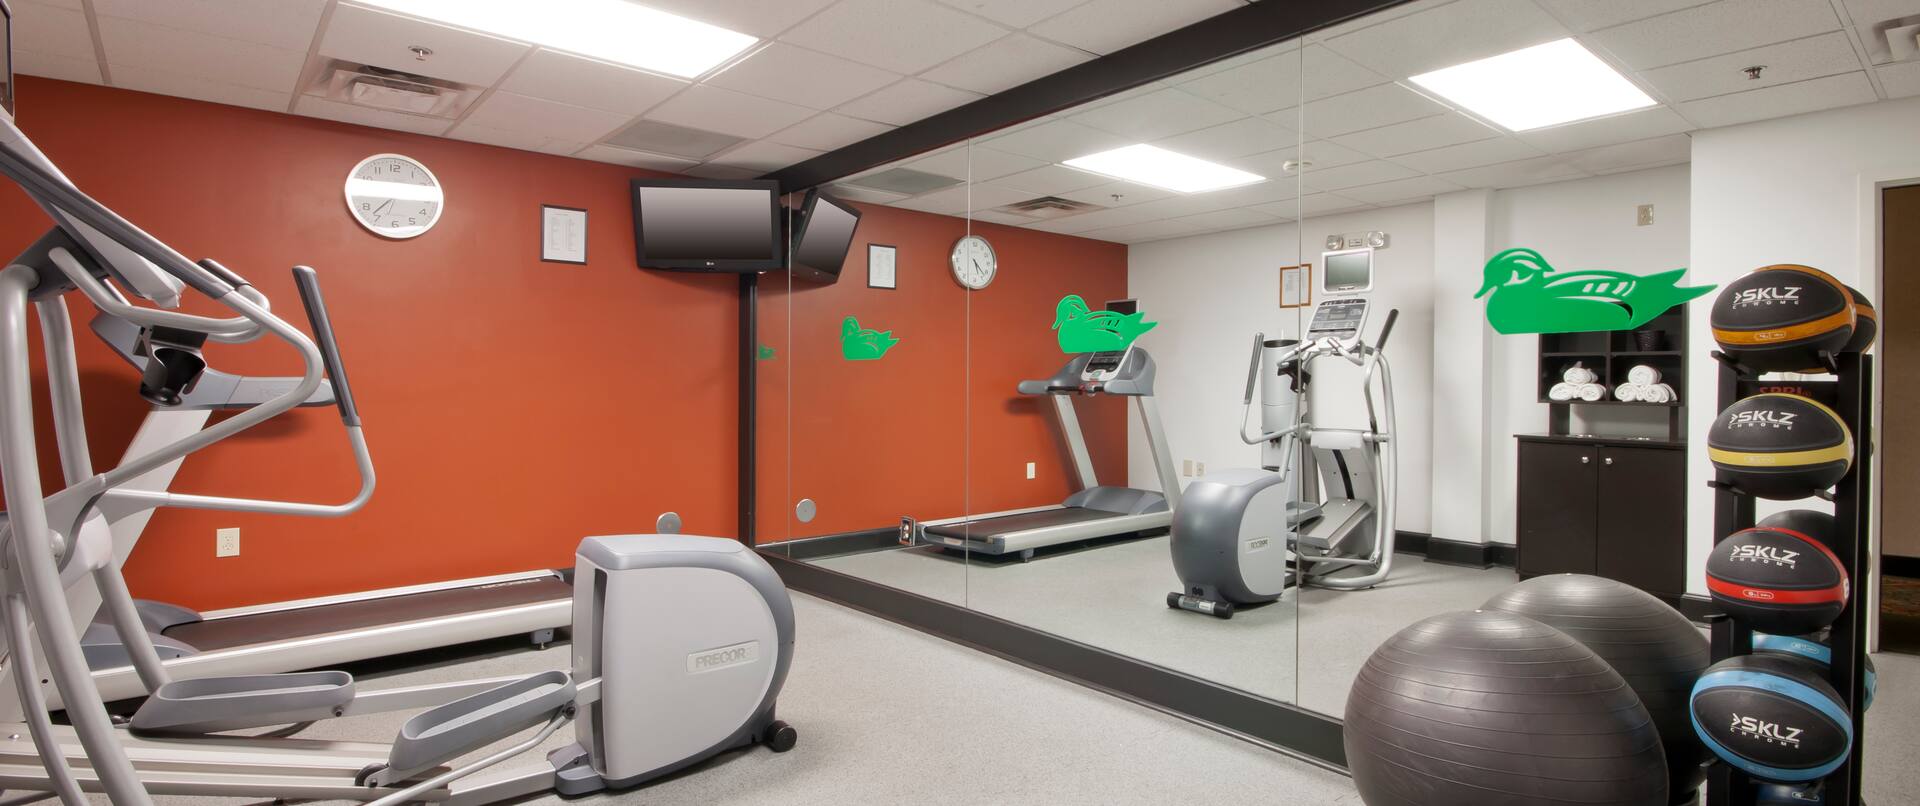 Fitness center with exercise machines and exercise balls